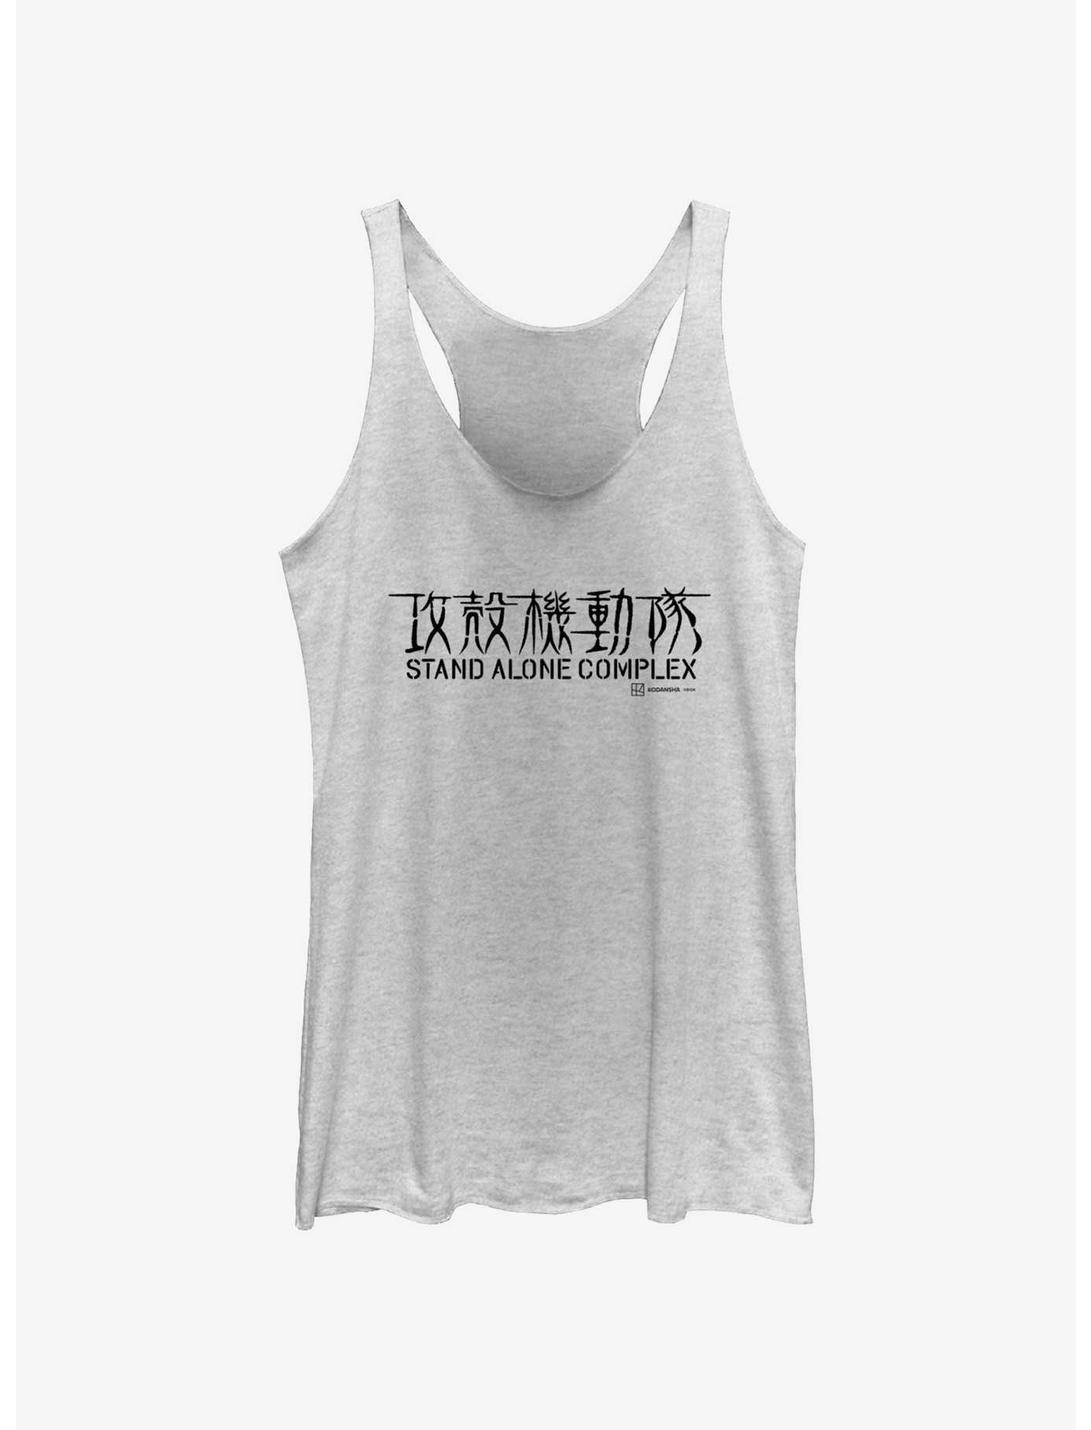 Ghost in the Shell Stand Alone Complex Logo Girls Tank, WHITE HTR, hi-res